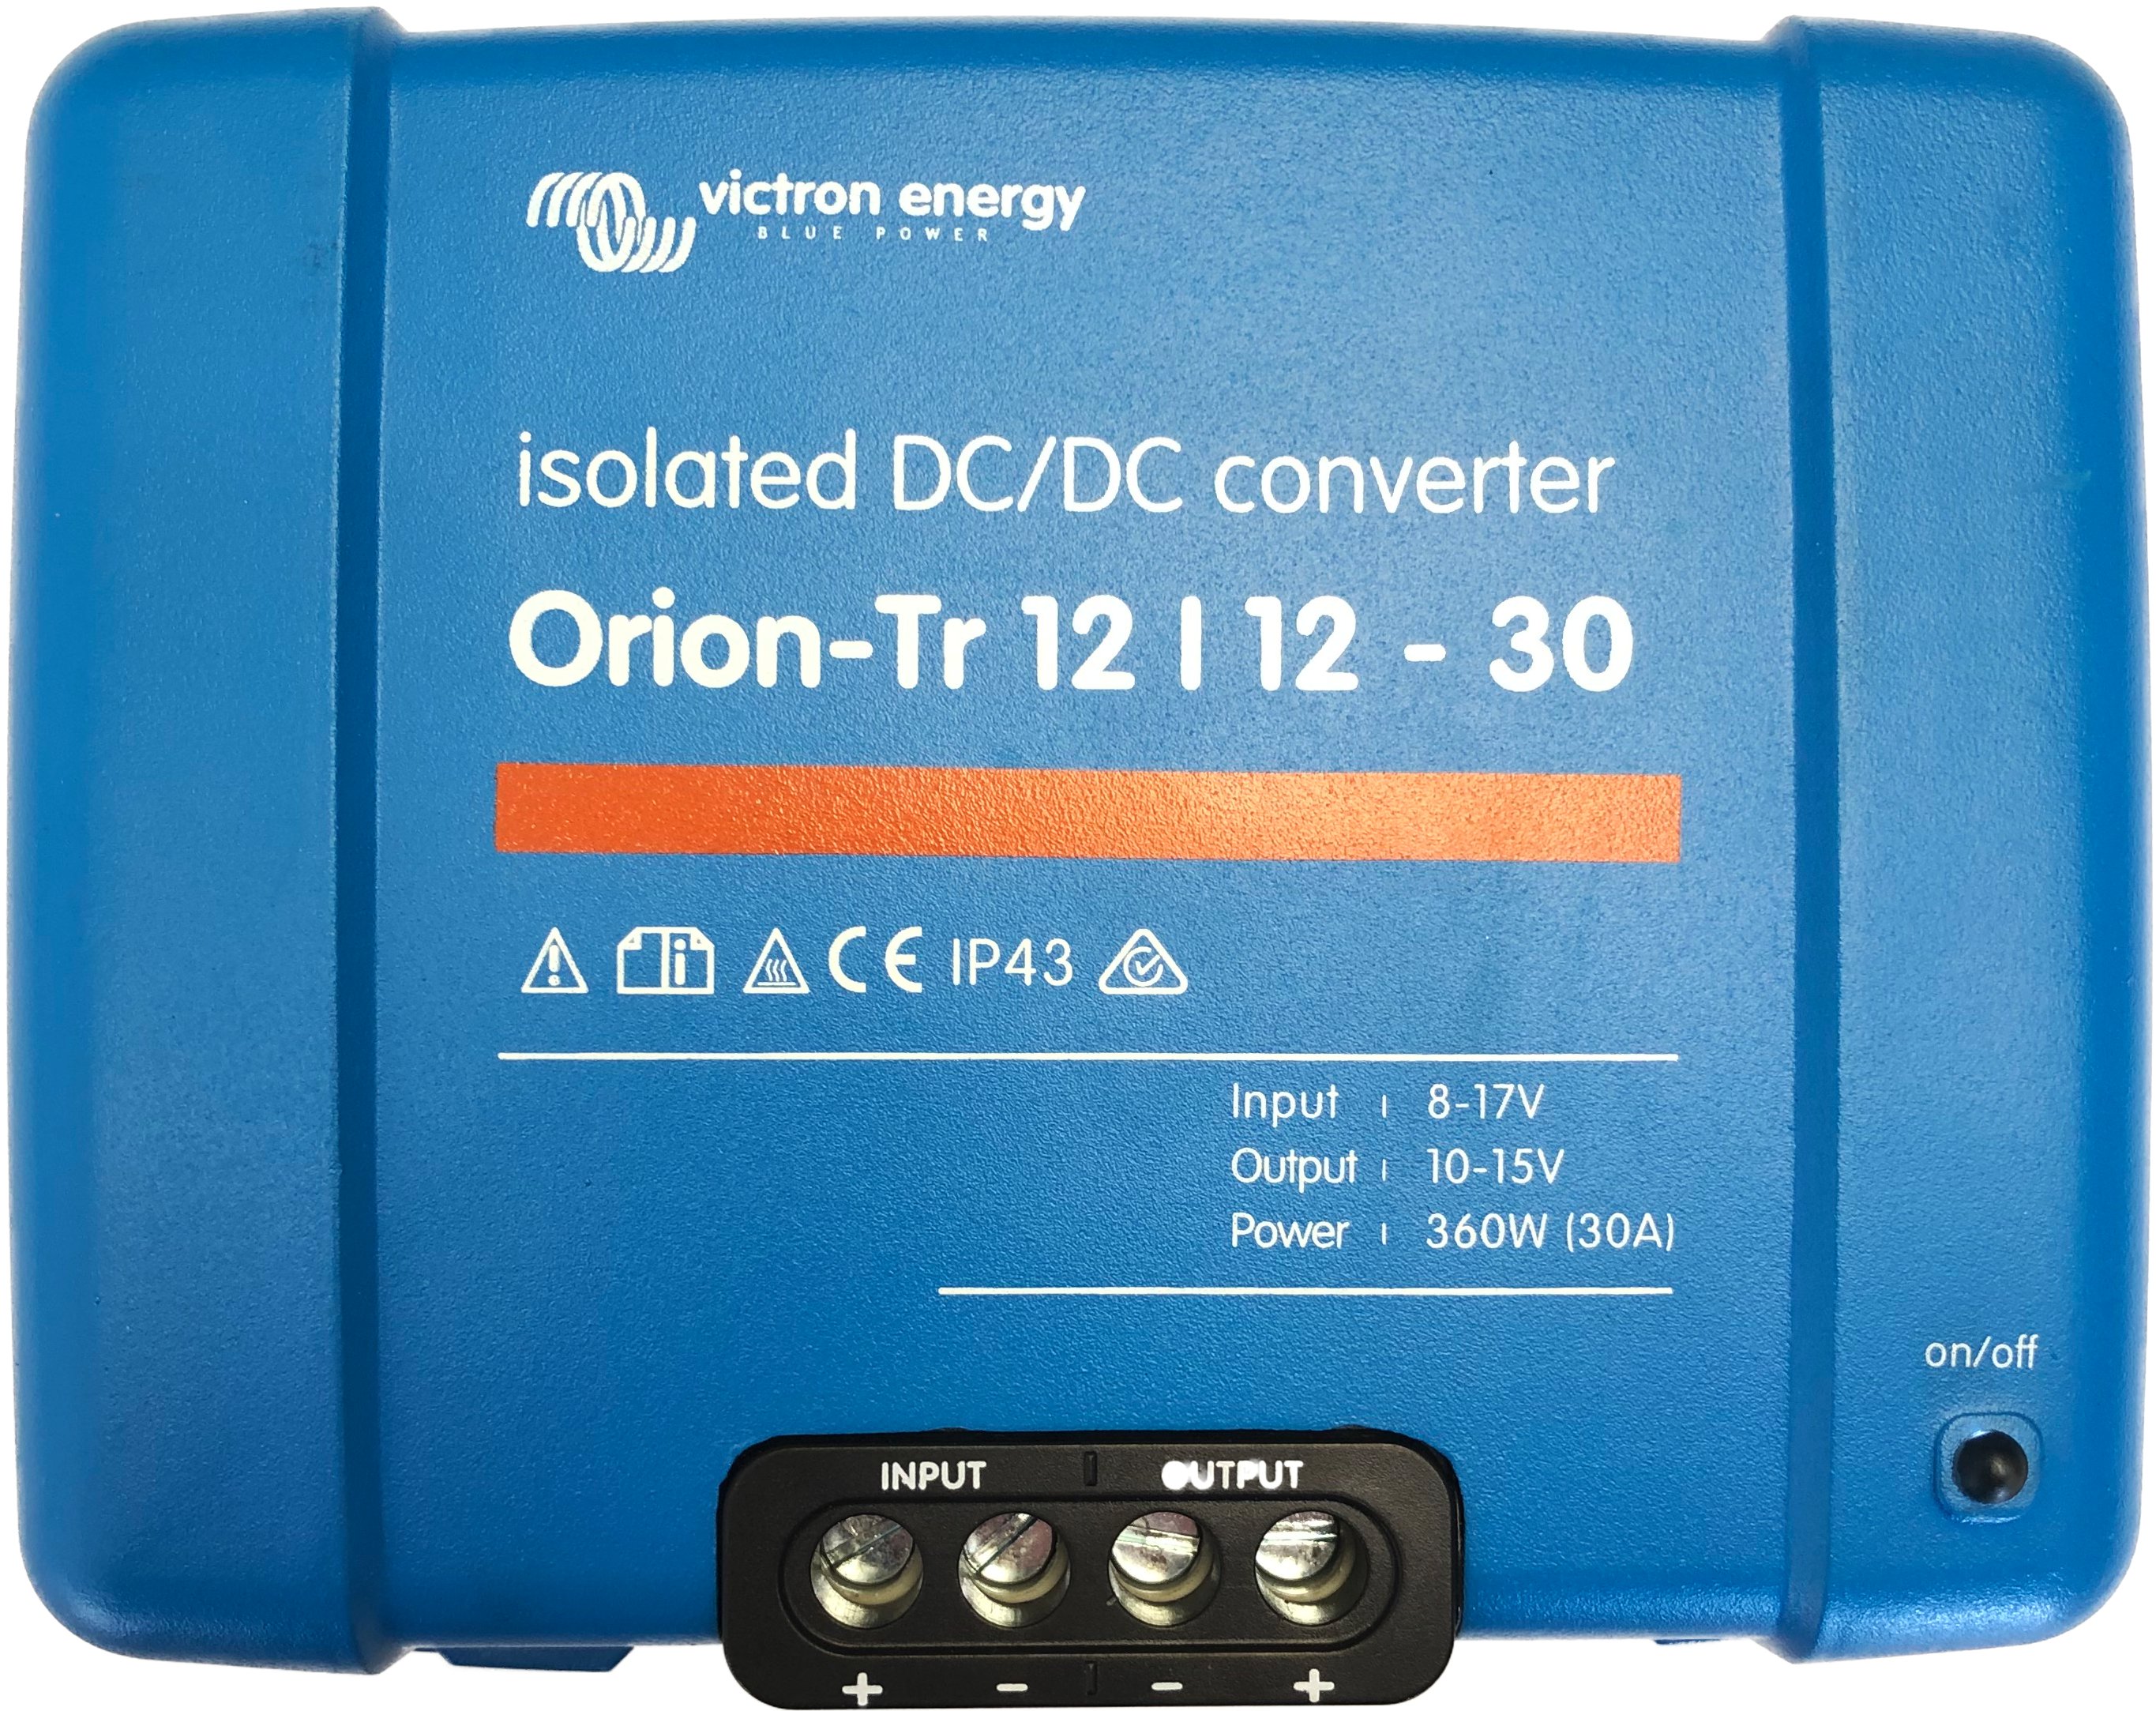 What's the power rating of this non isolated dc dc converter?